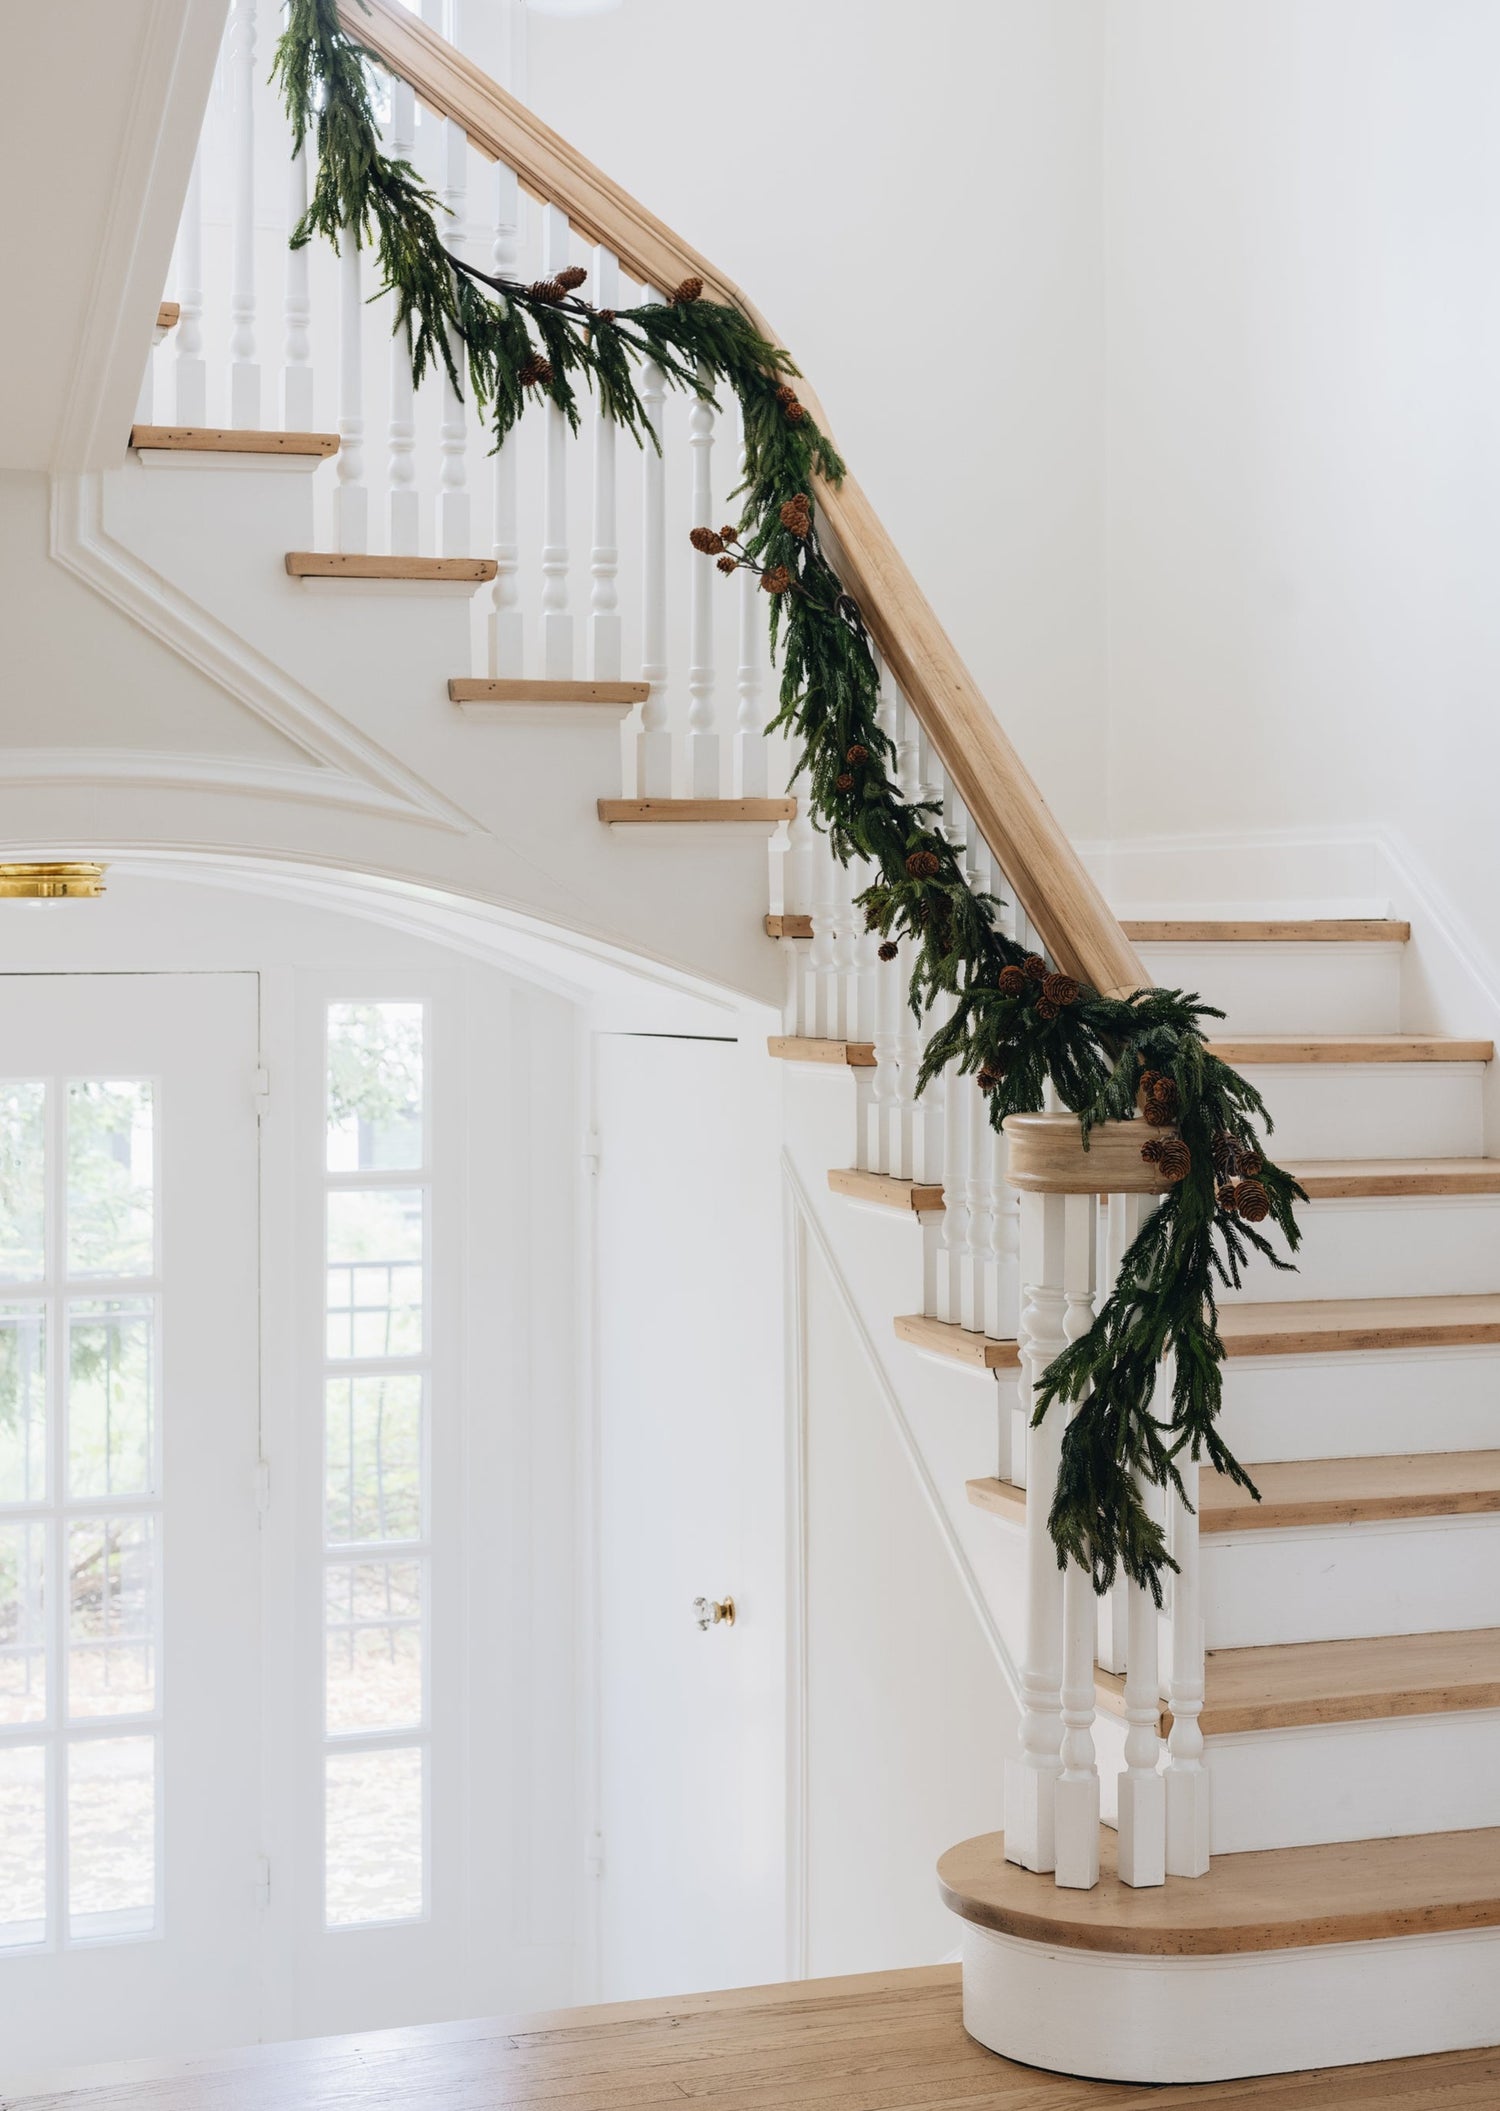 Extra Long Norfolk Garland Down the Stair Rail